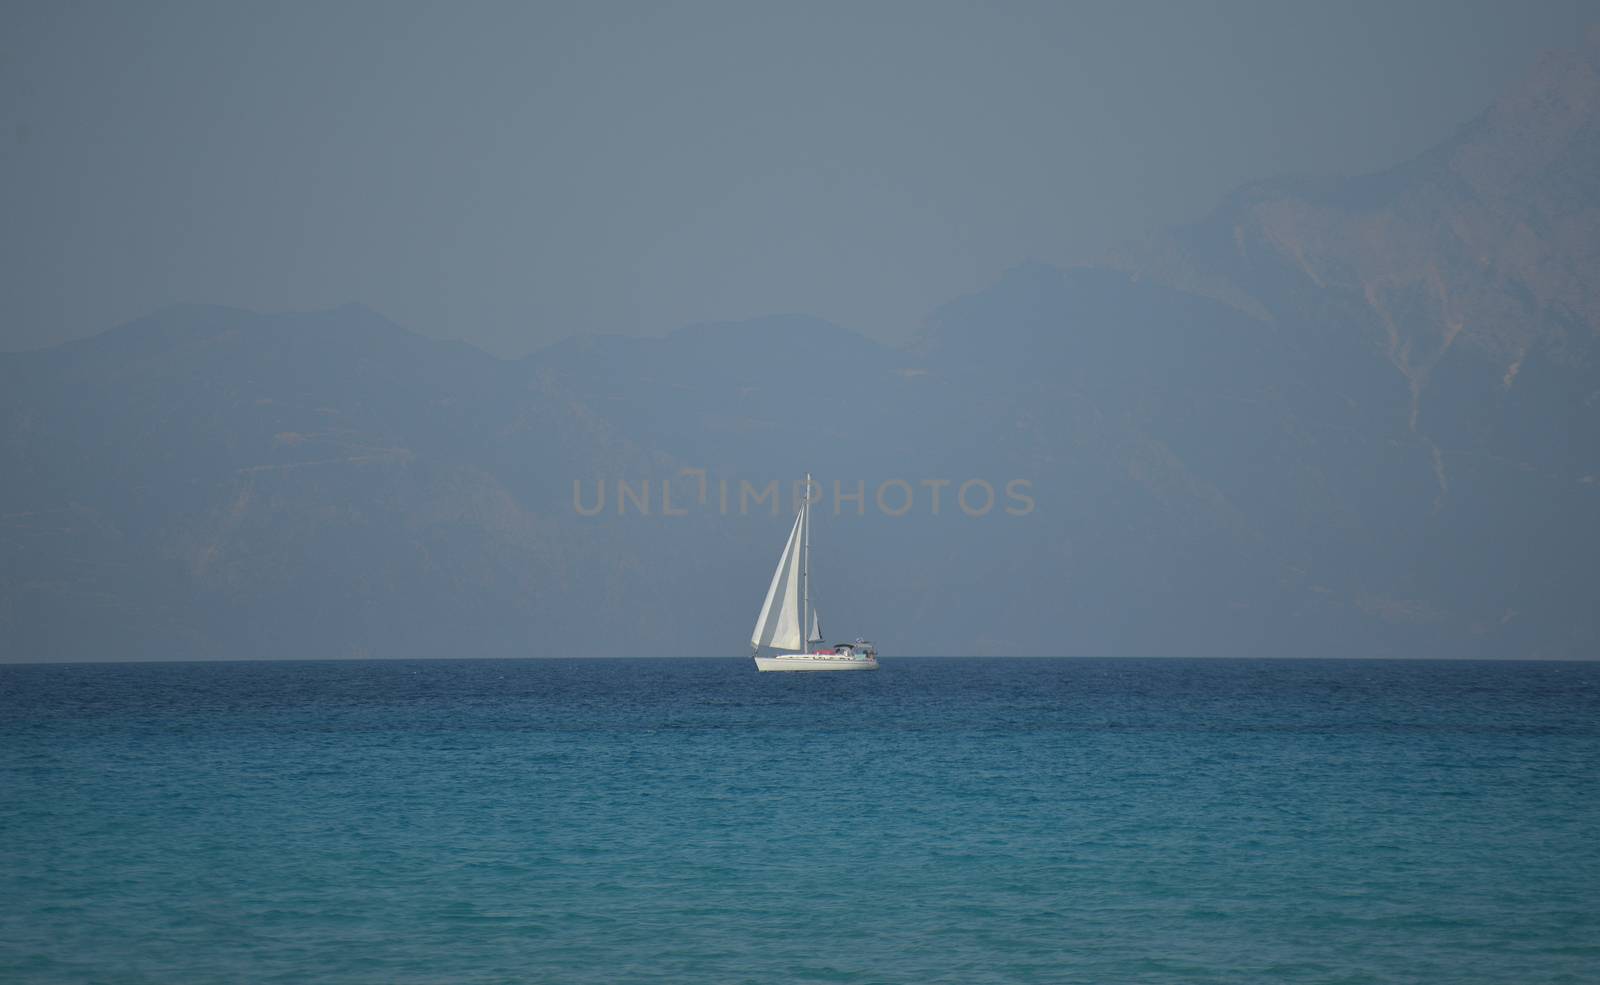 A white sailboat at sea in a hazy afternoon.